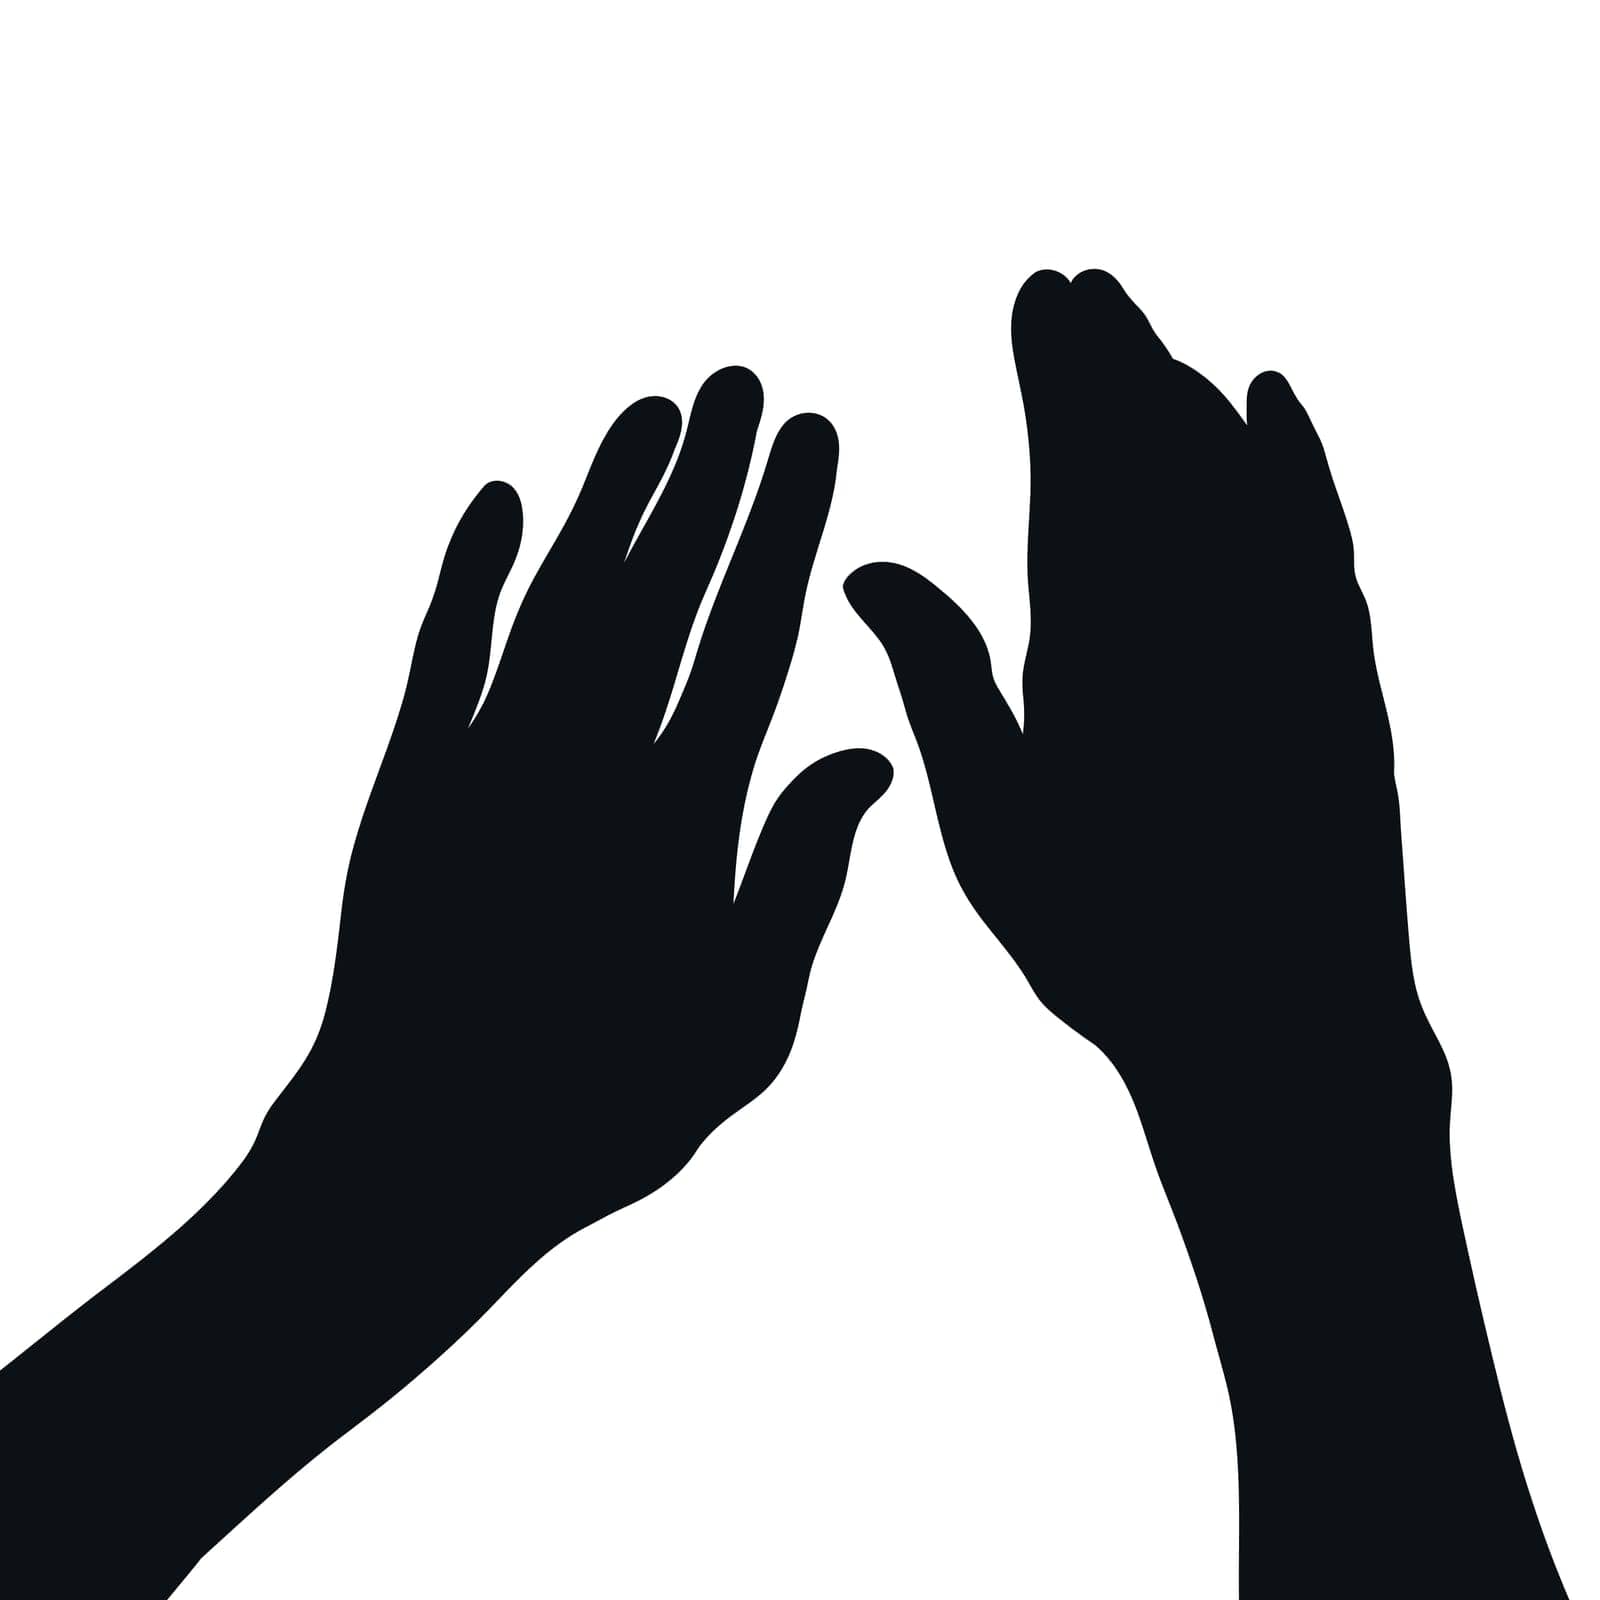 Silhouette of Hands stroking the surface. Human hands silhouette. Vector illustration by psychoche